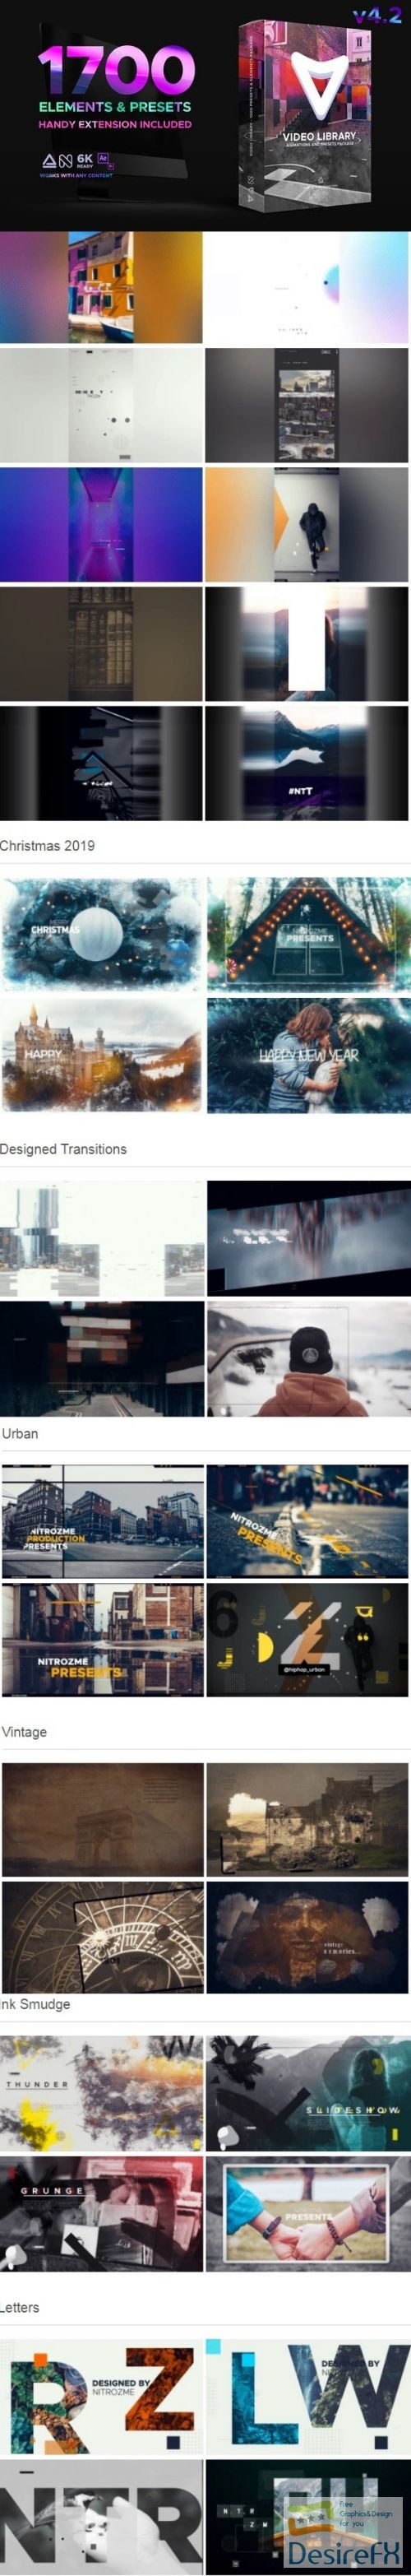 Videohive Video Library Video Presets Package V4.2 21390377